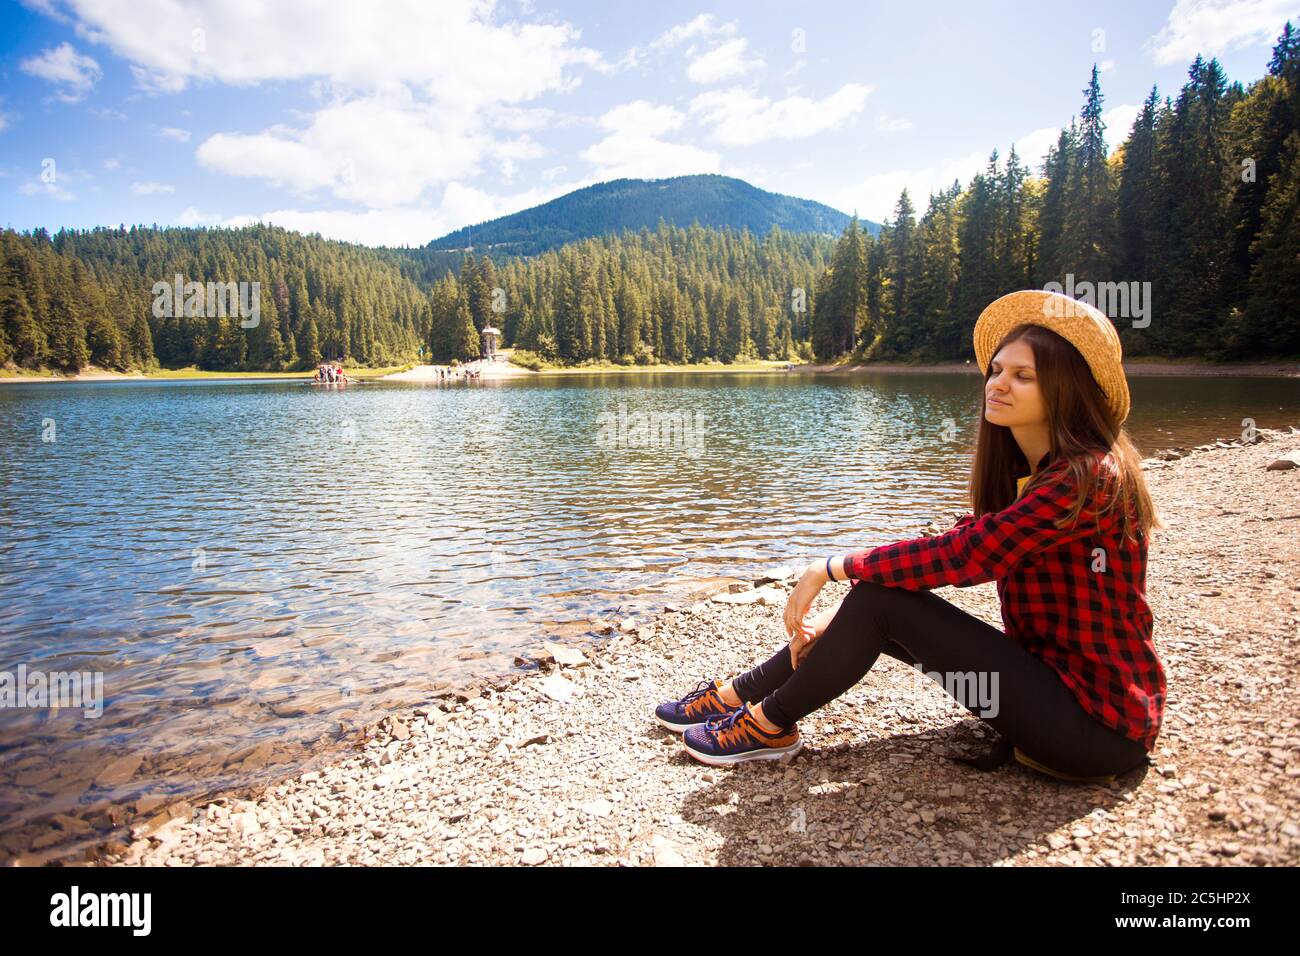 Tourist woman in hat sitting backwards and watching magic lake in mountains country landscape. Stock Photo